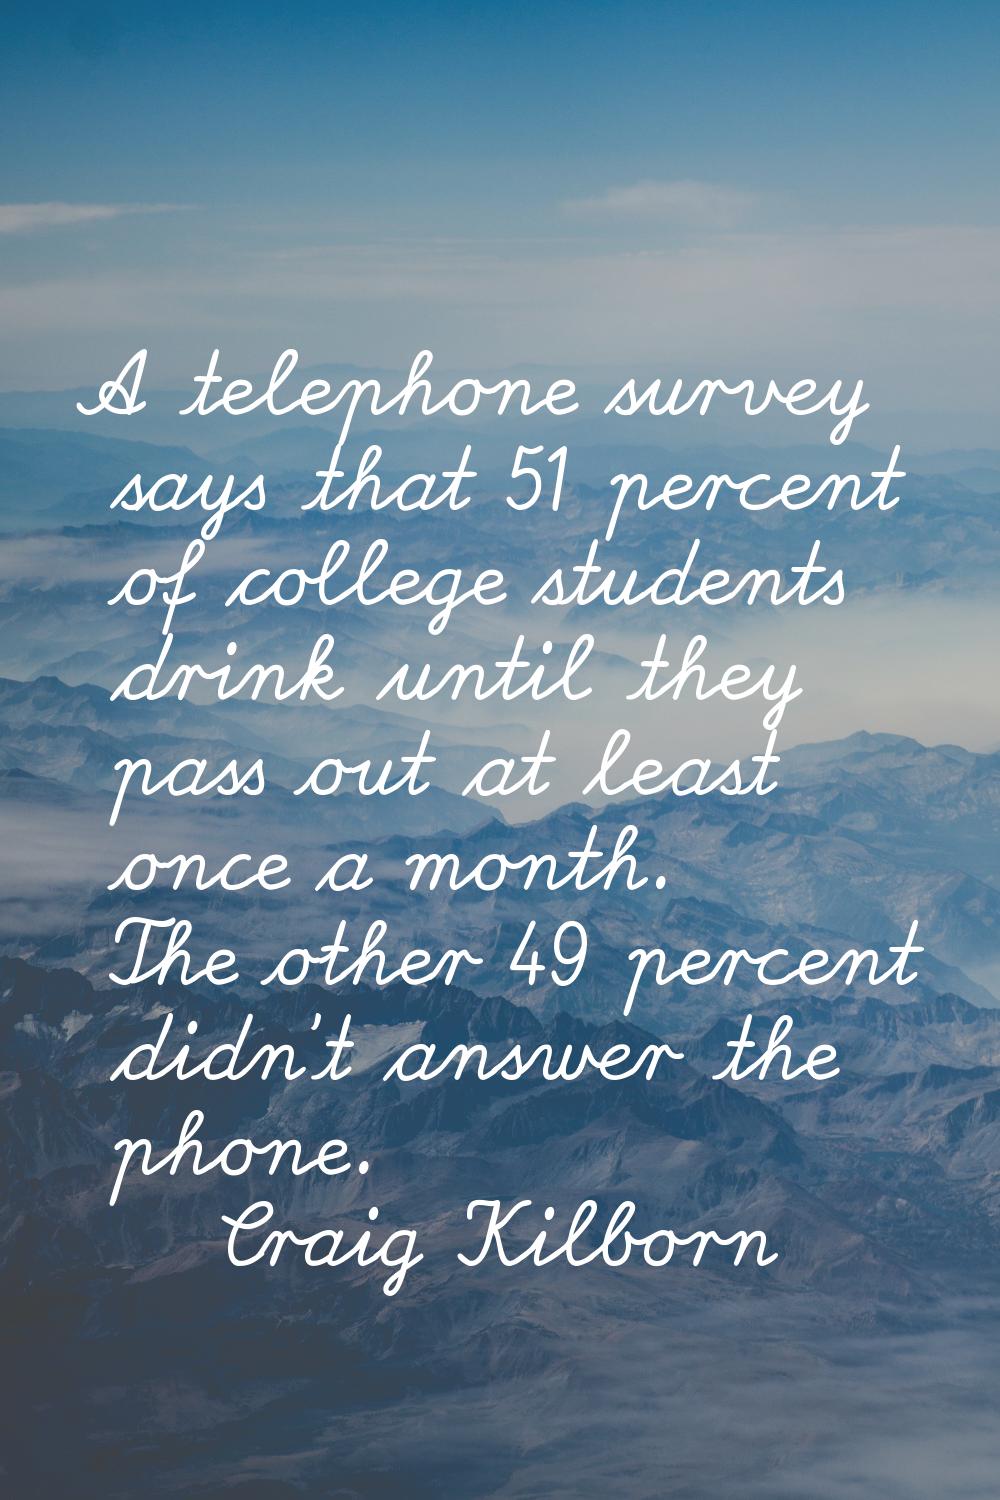 A telephone survey says that 51 percent of college students drink until they pass out at least once